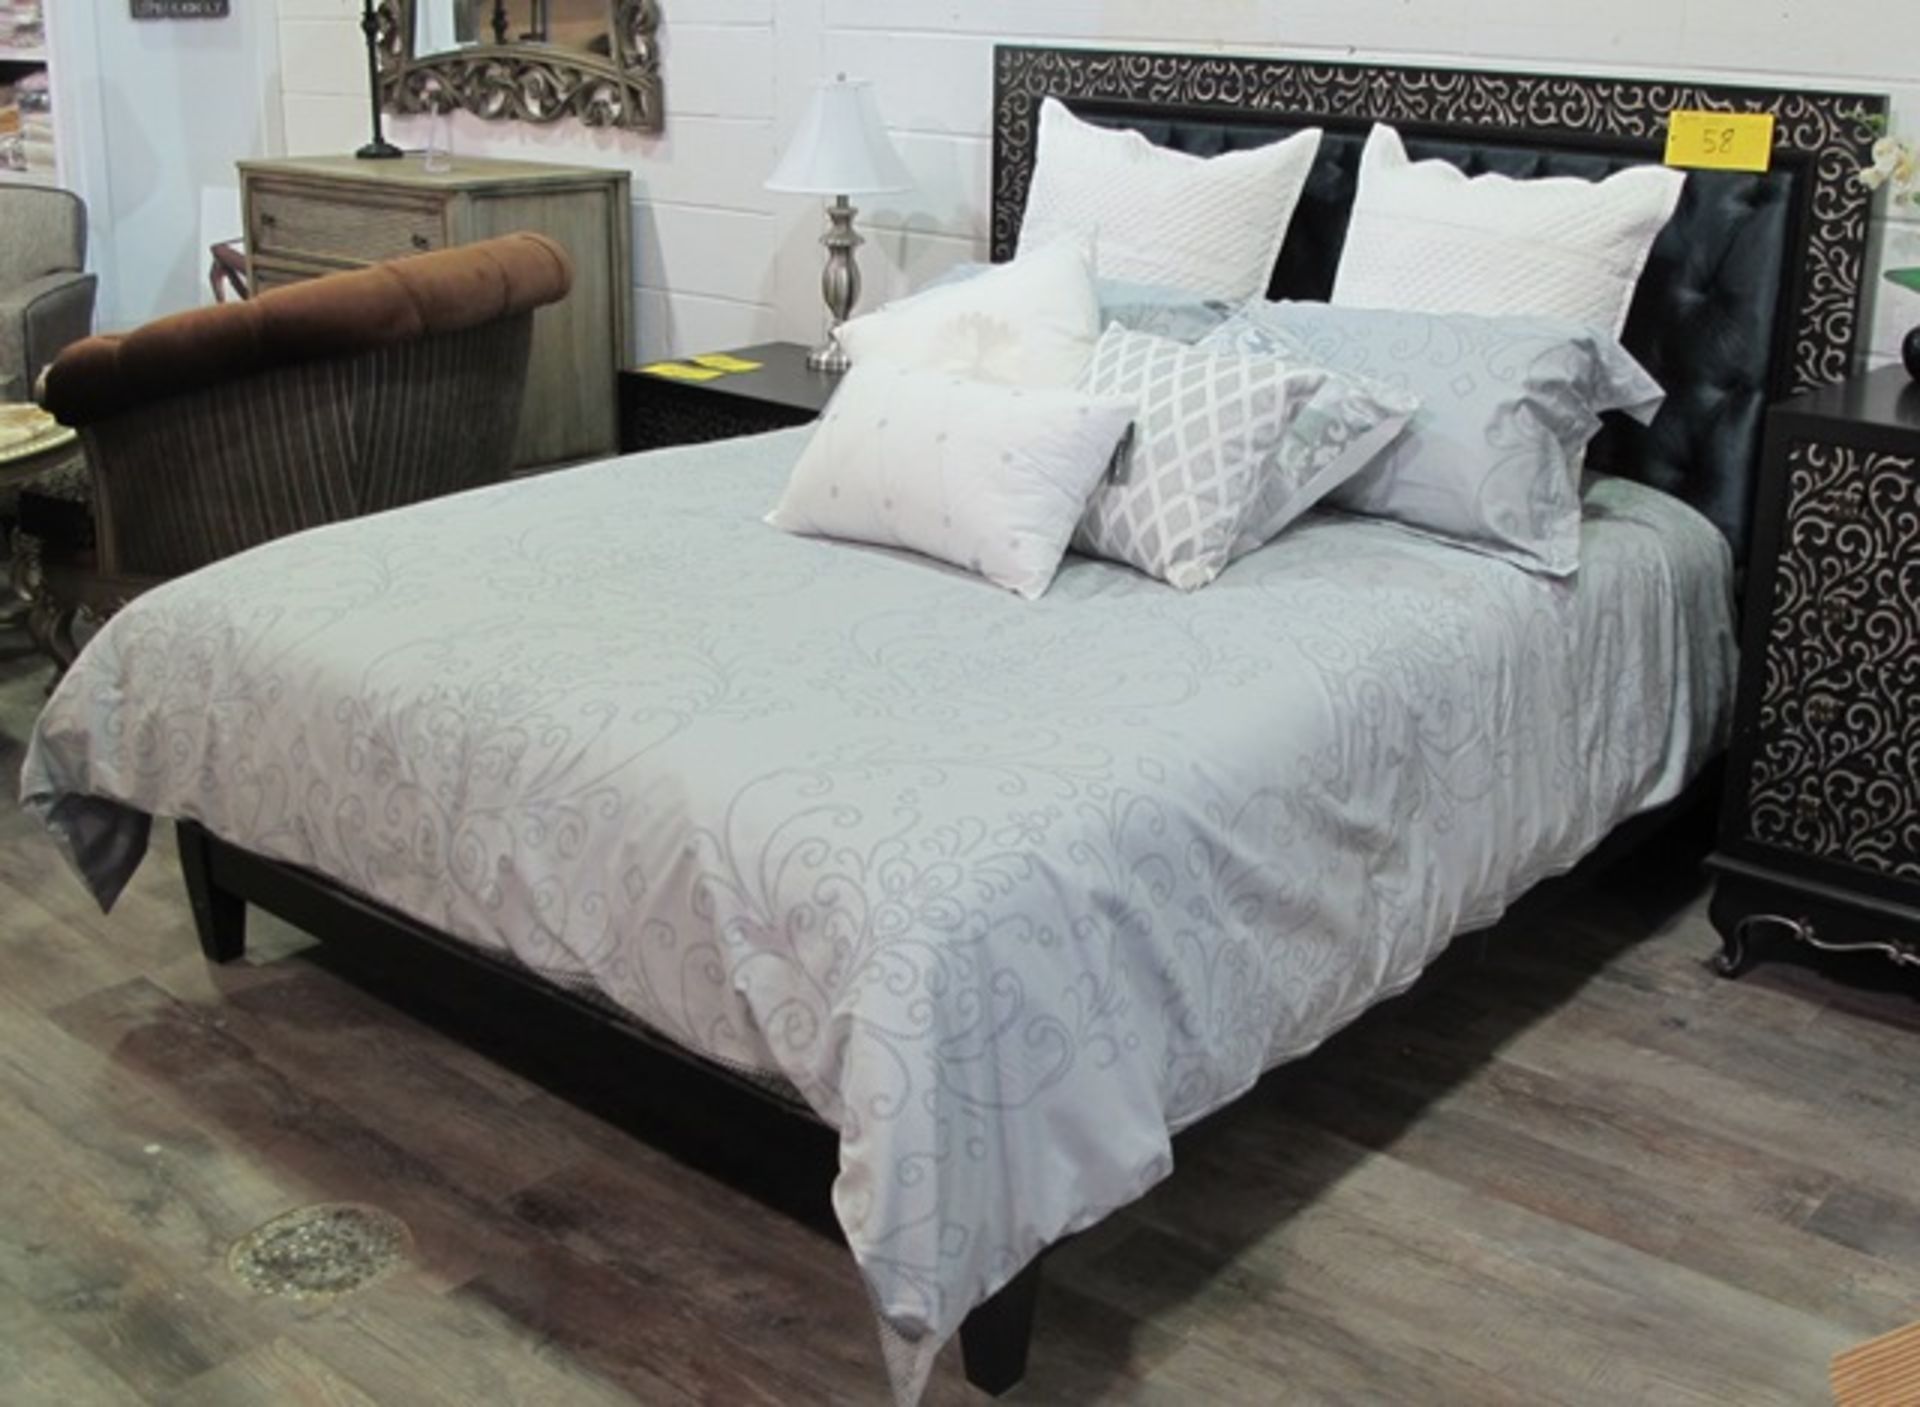 ORLEANS QUEEN SIZE BED, MSRP $6,050 (HEADBOARD & FRAME ONLY)